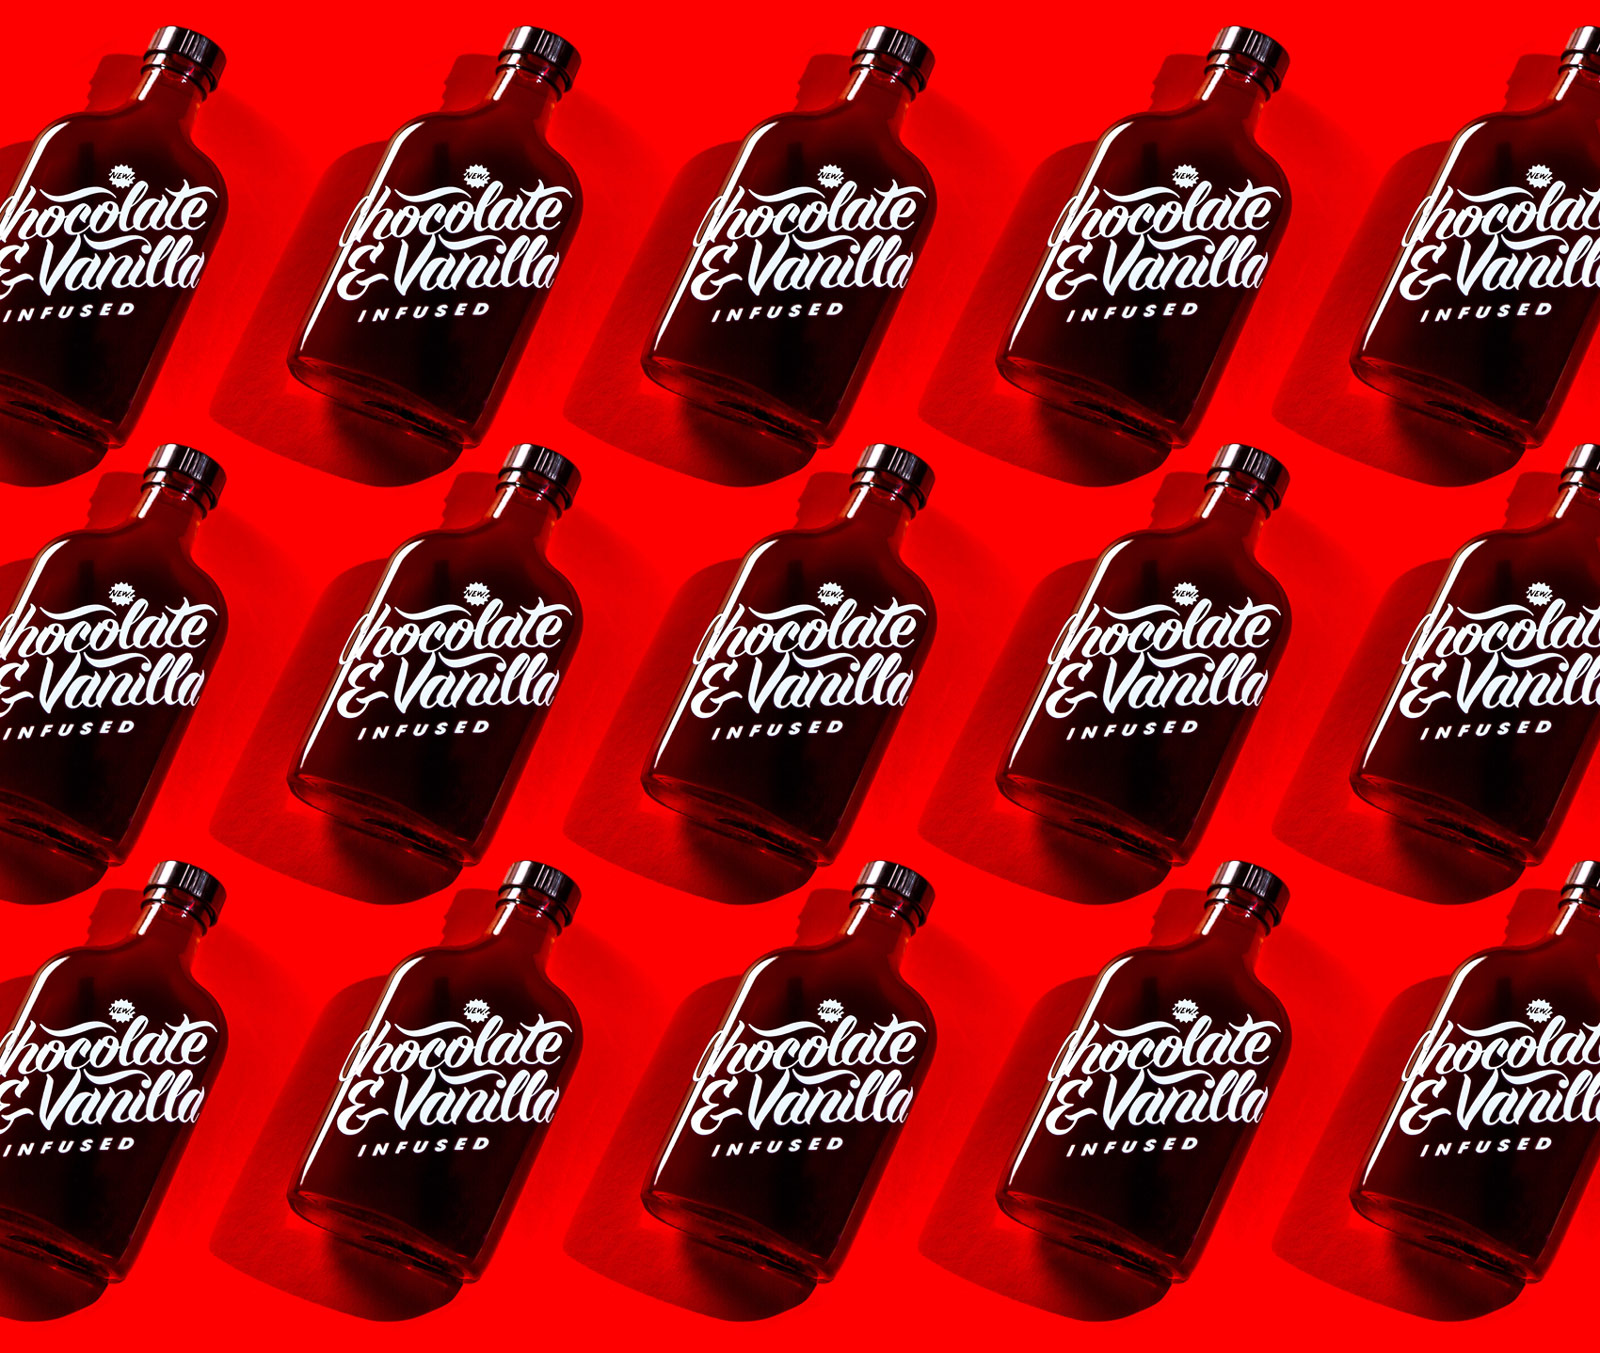 image of typography on bottles